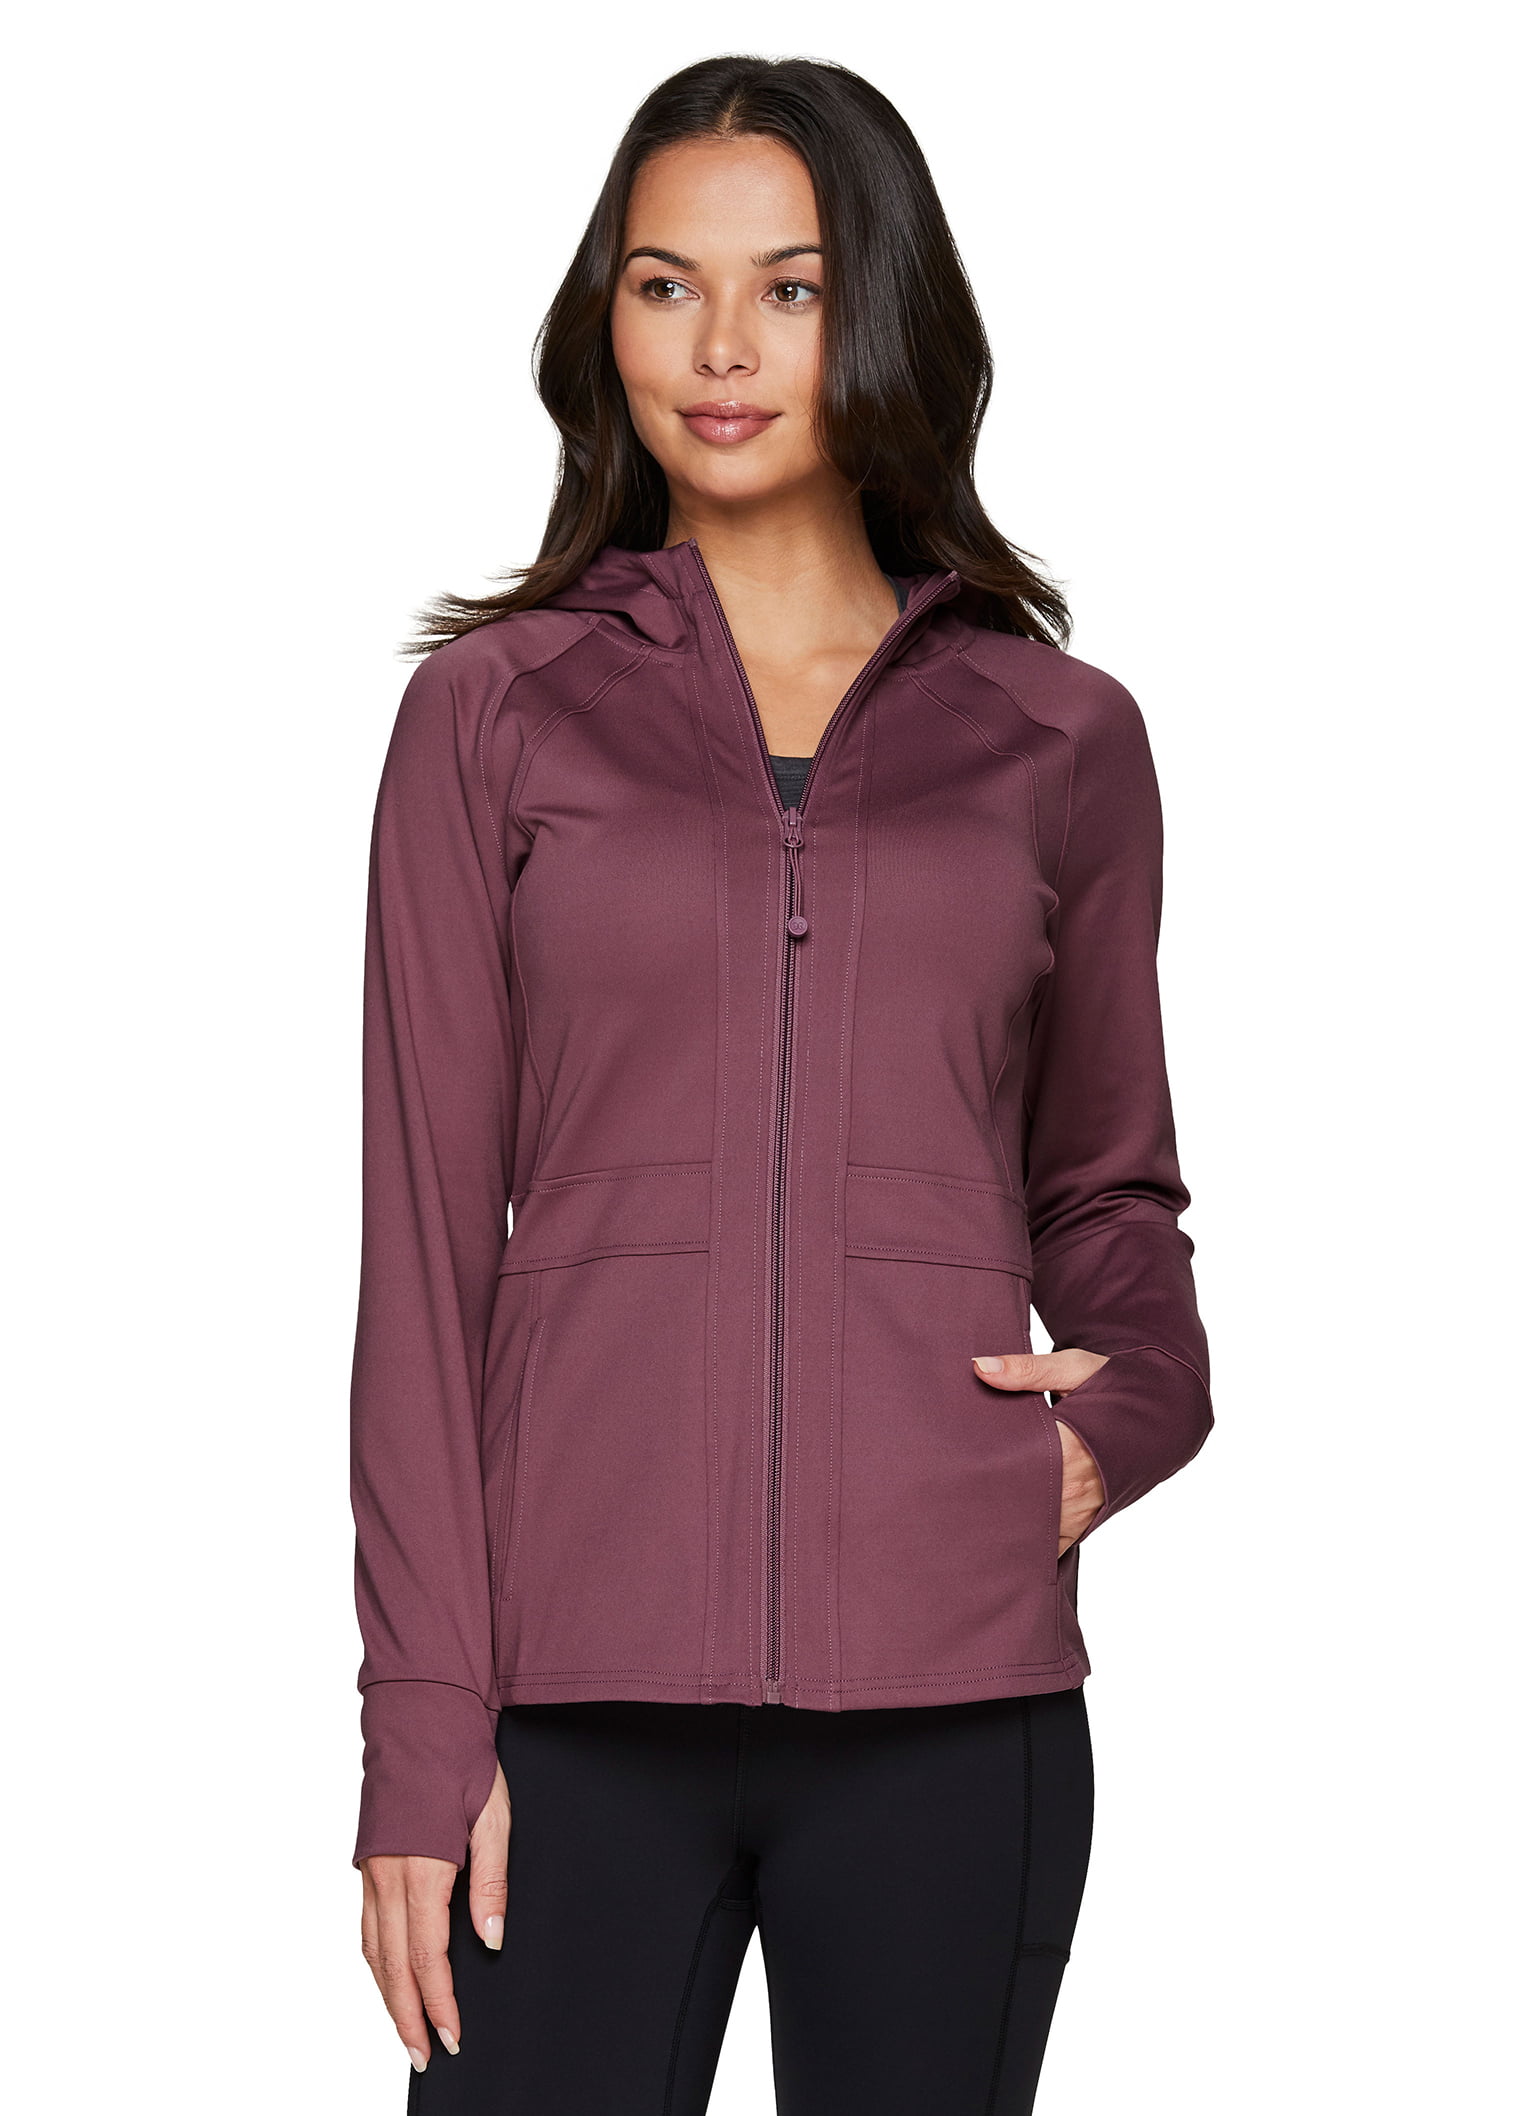 RBX Active Womens Athletic Performance Peached Ultra Soft Zip Up Running Jacket with Pockets